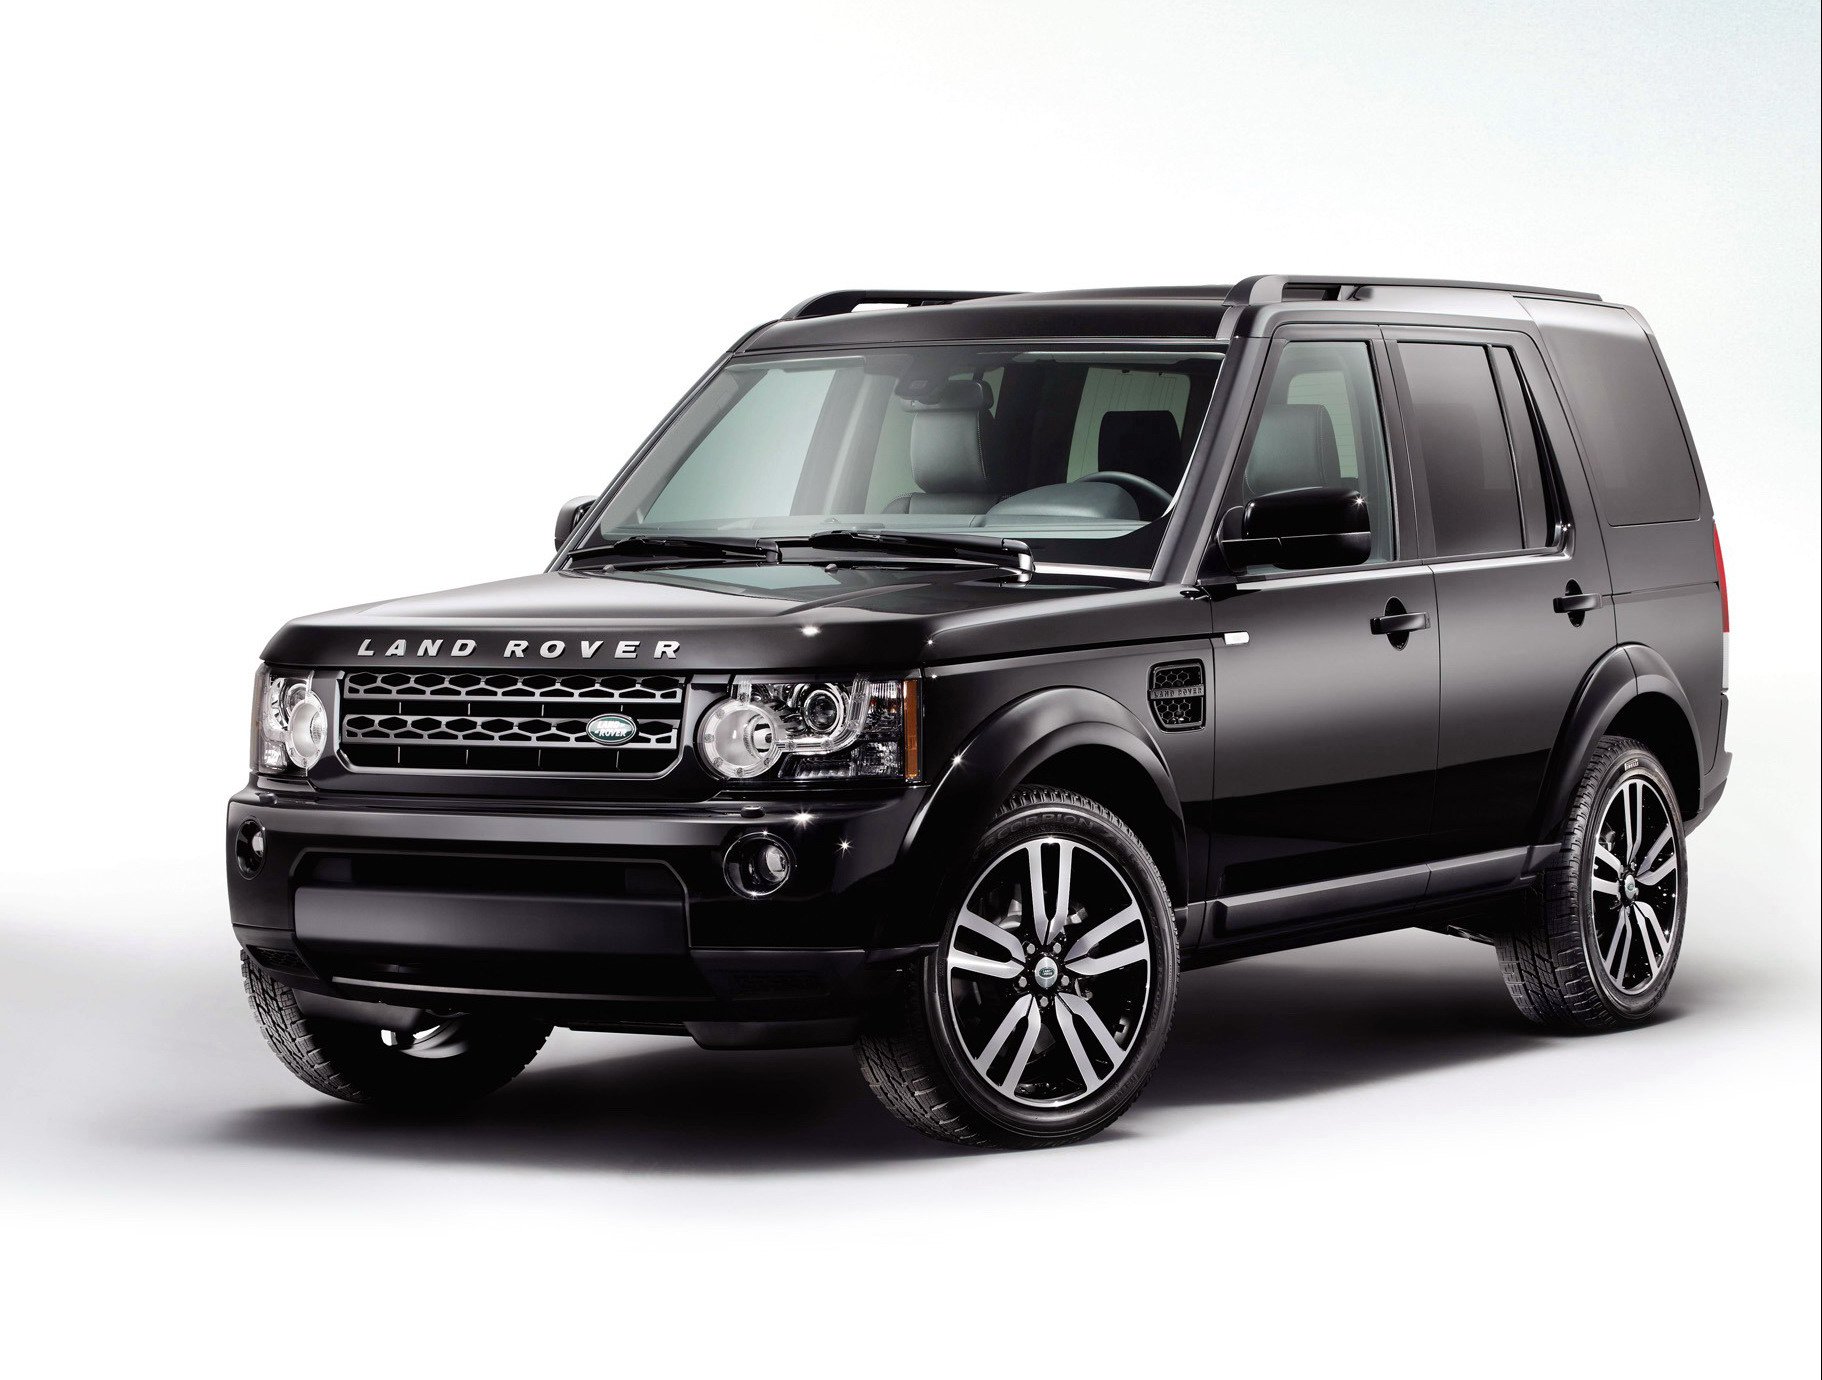 2011 Land Rover Discovery 4 Landmark Limited Editions Review - Top Speed